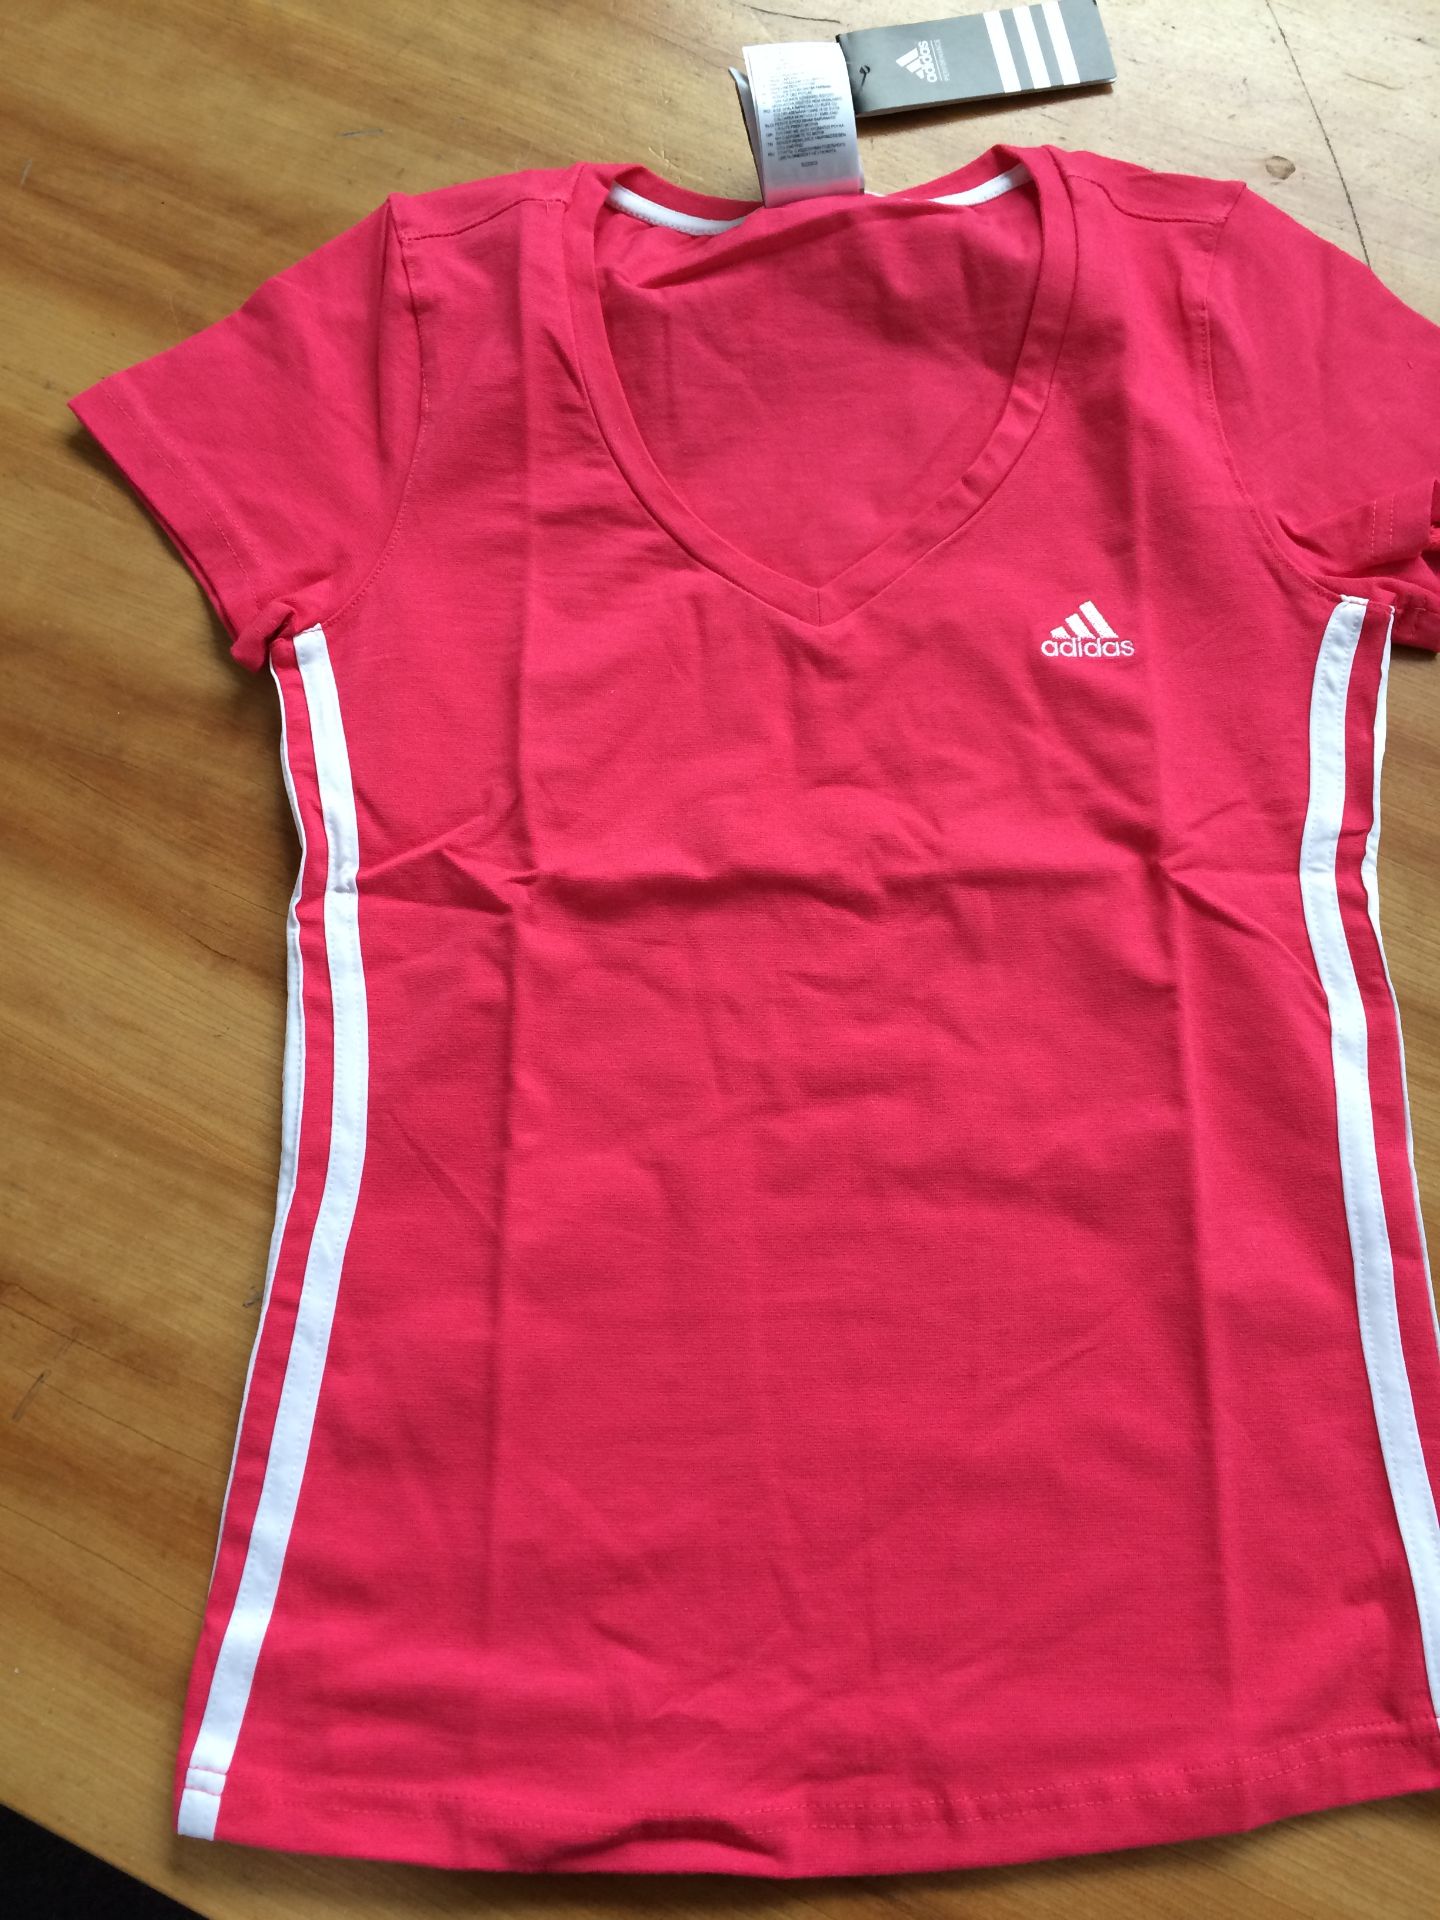 V Brand New 5 in a Pack Woman Addidas V Neck T Shirts 100% Cotton Short Sleeve 3 Stripe Detail